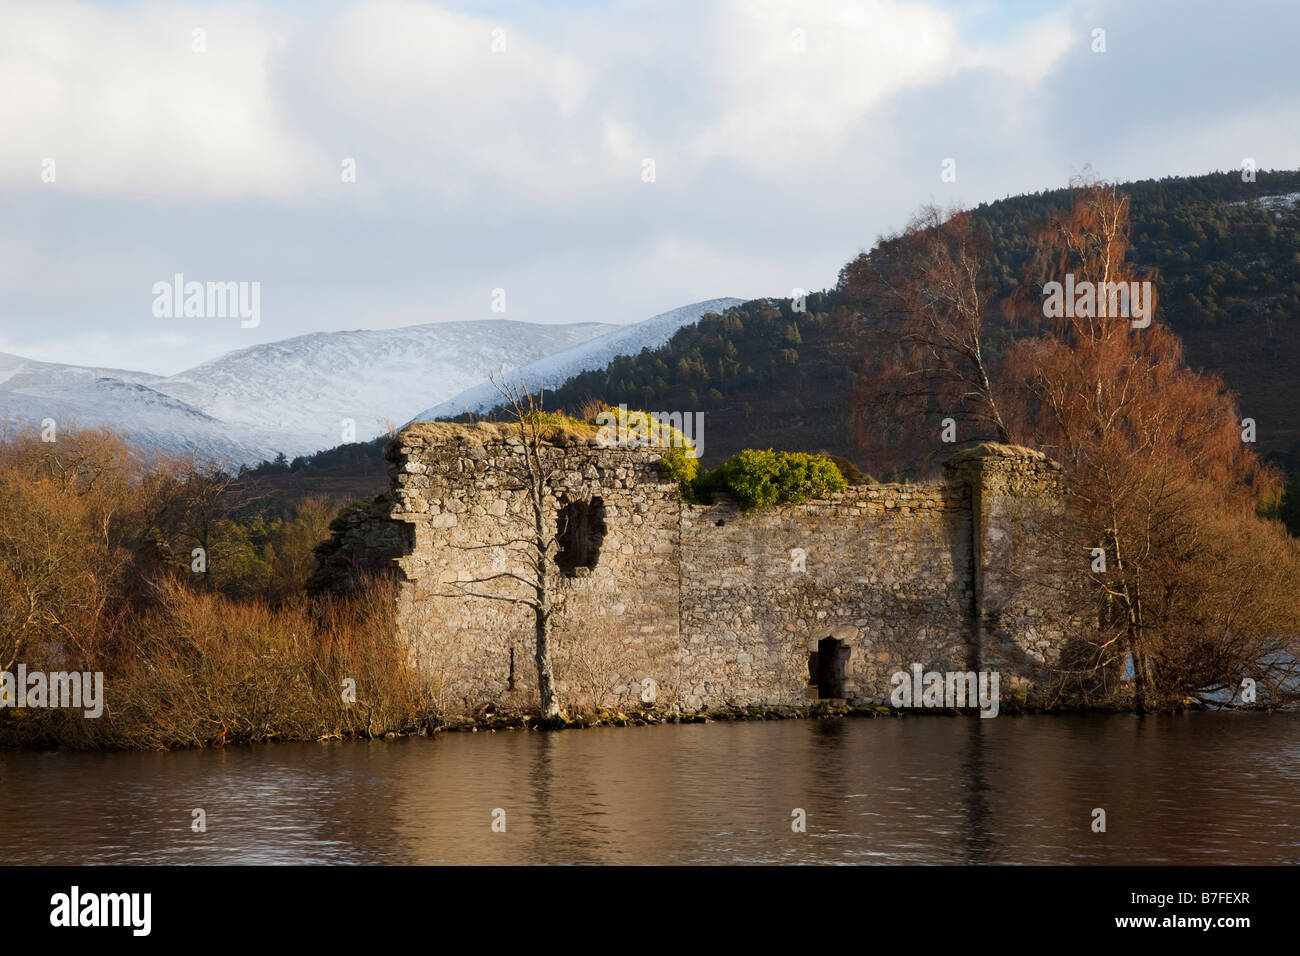 Lochside ruined historic 13th century island castle, forest and hill at freshwater Loch an Eilein, Craig Dubh, Rothiemurchus, Aviemore, Scotland, UK Stock Photo